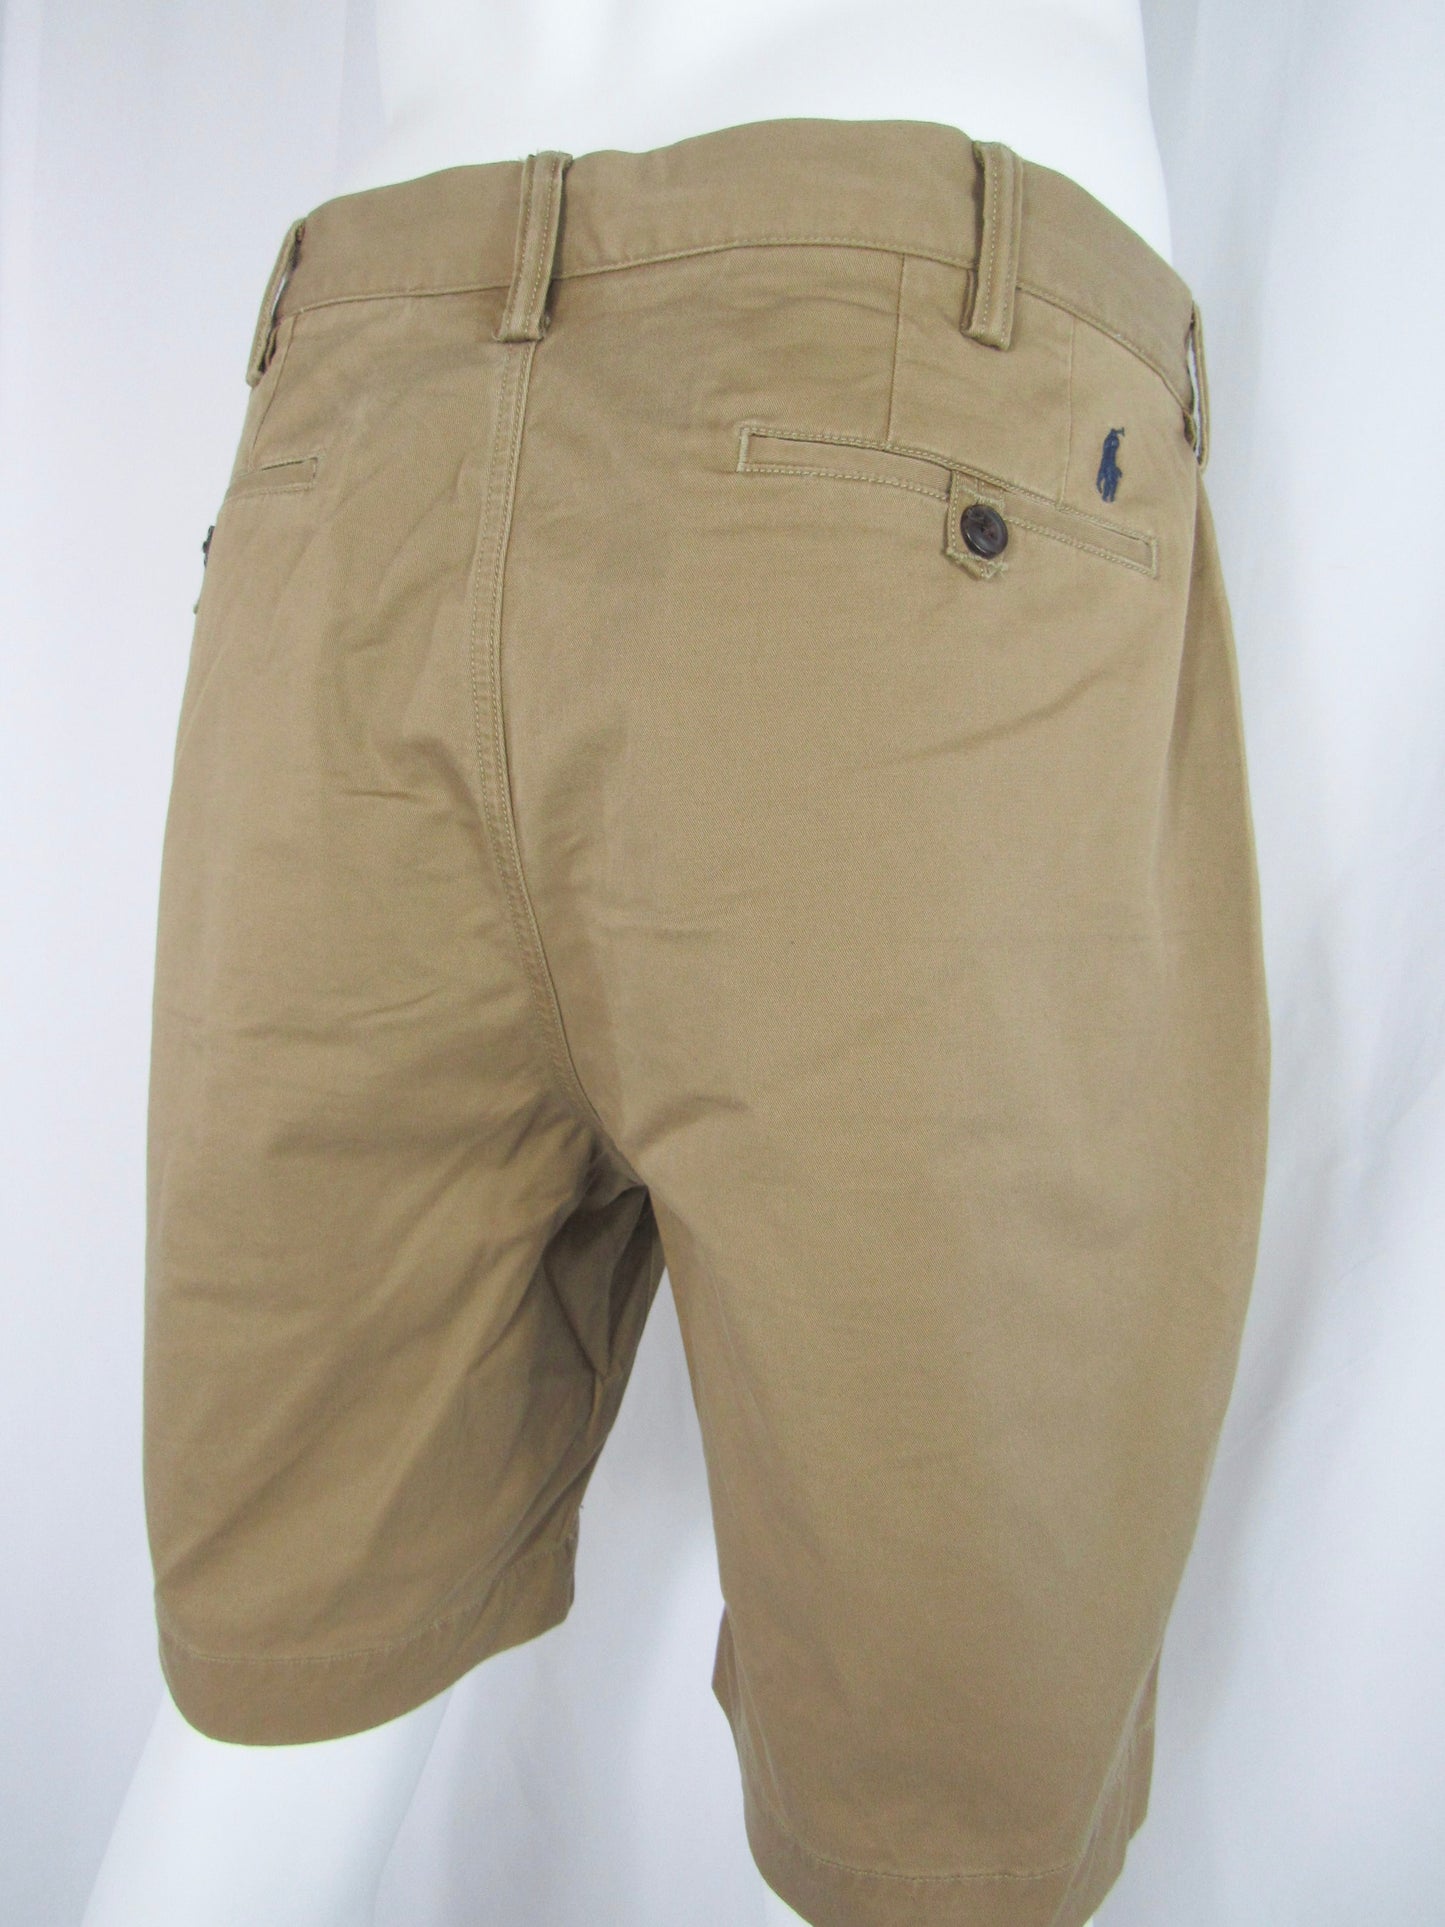 RALPH LAUREN Stretch Classic Fit Chino Shorts - Size 36